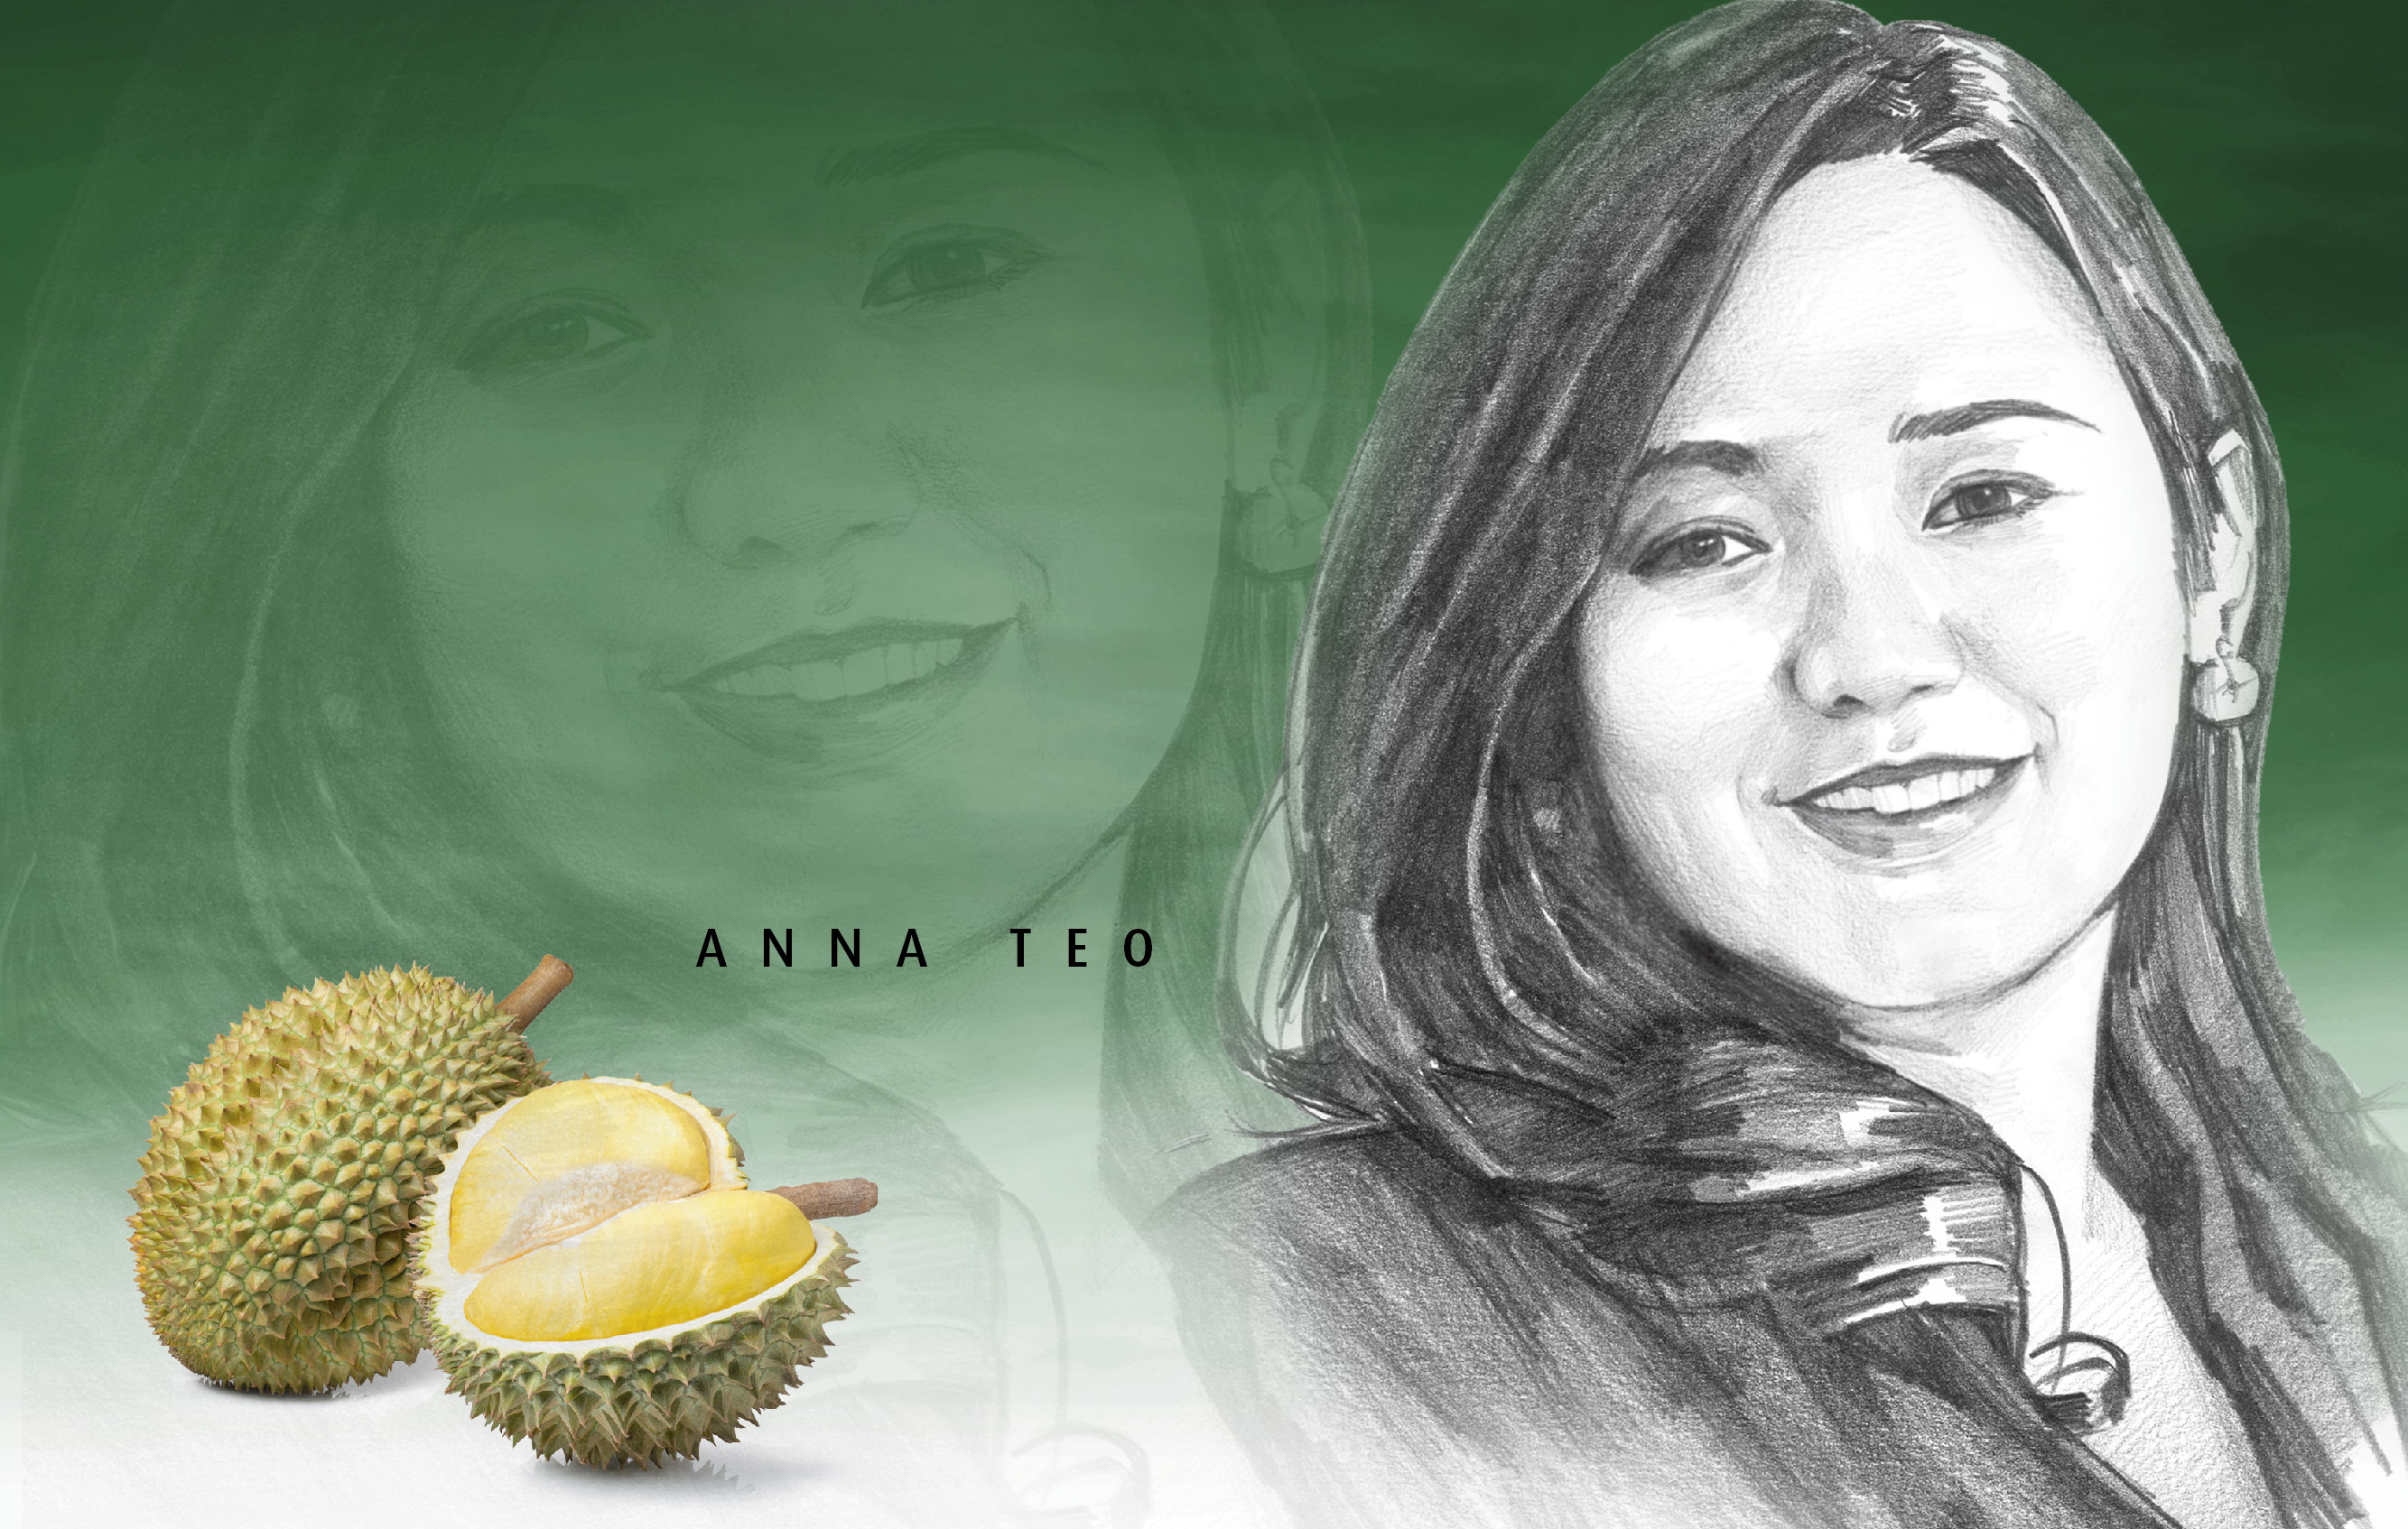 Musang Queen Anna Teo undeterred by Black Thorn durian fad